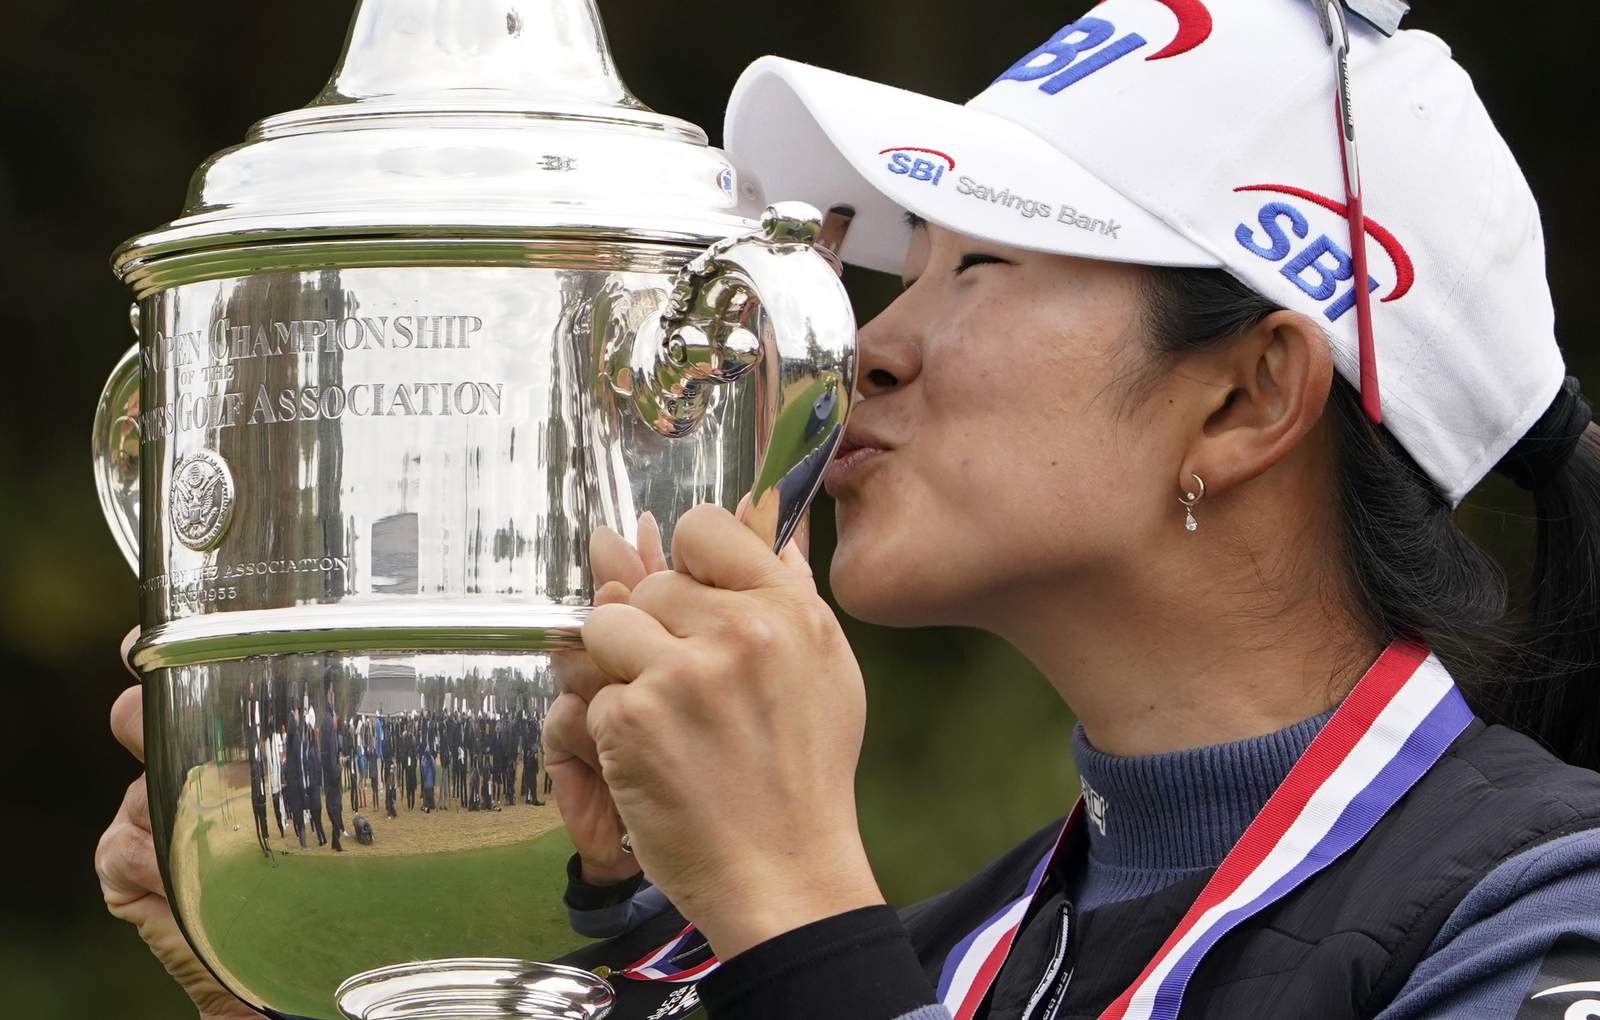 A Lim Kim wins US Women's Open debut with record-tying rally